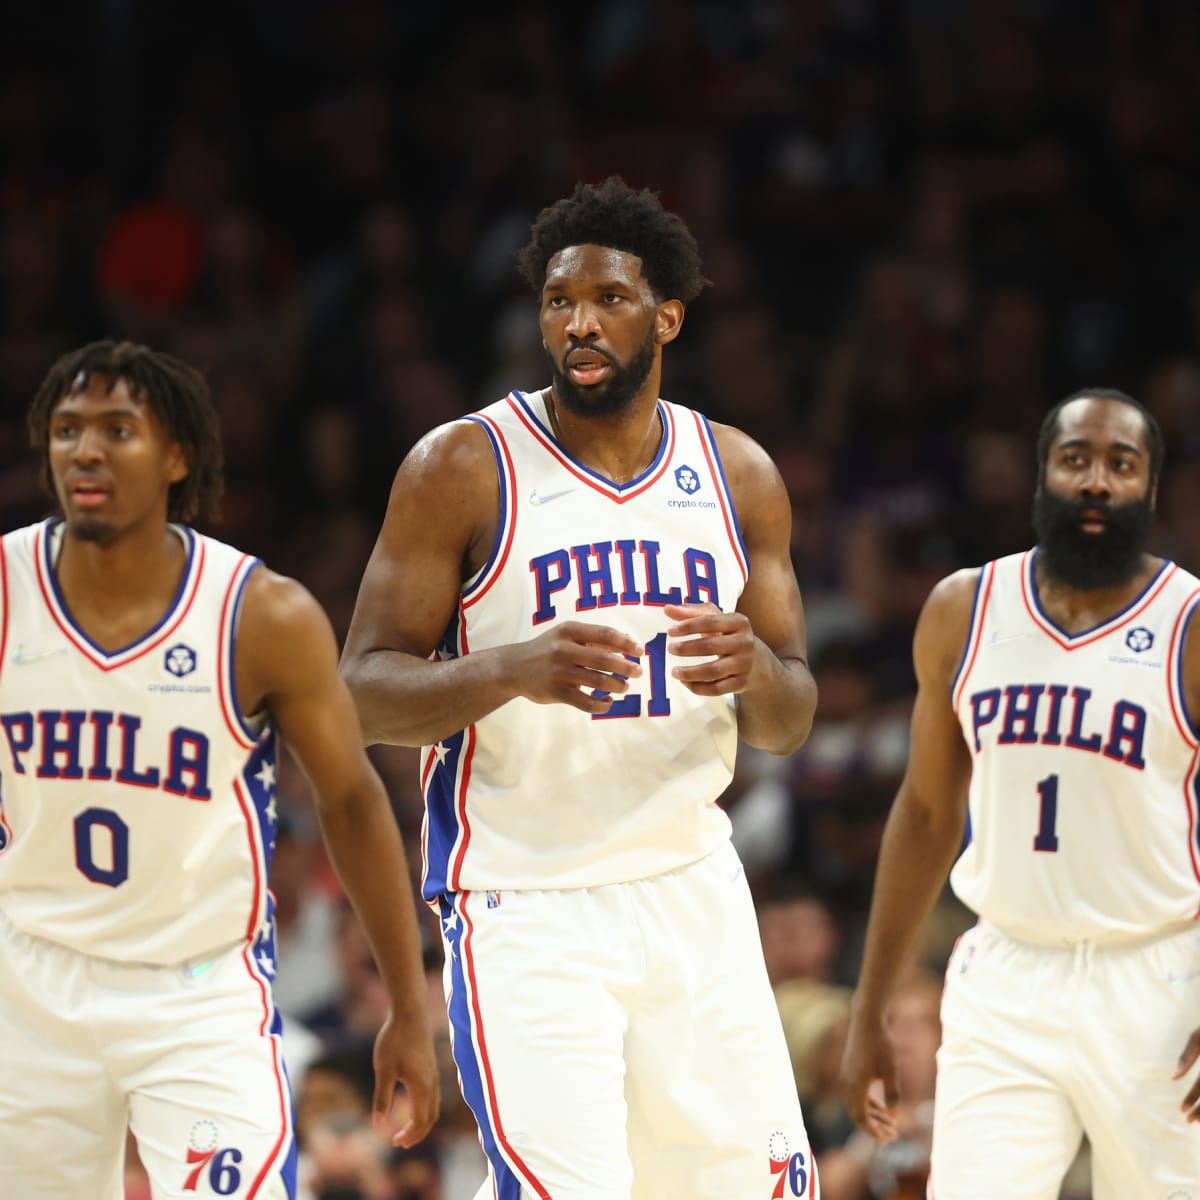 JOEL EMBIID & JAMES HARDEN & TYRESE MAXEY - 76ers Signed 8x10 RP Photo !!